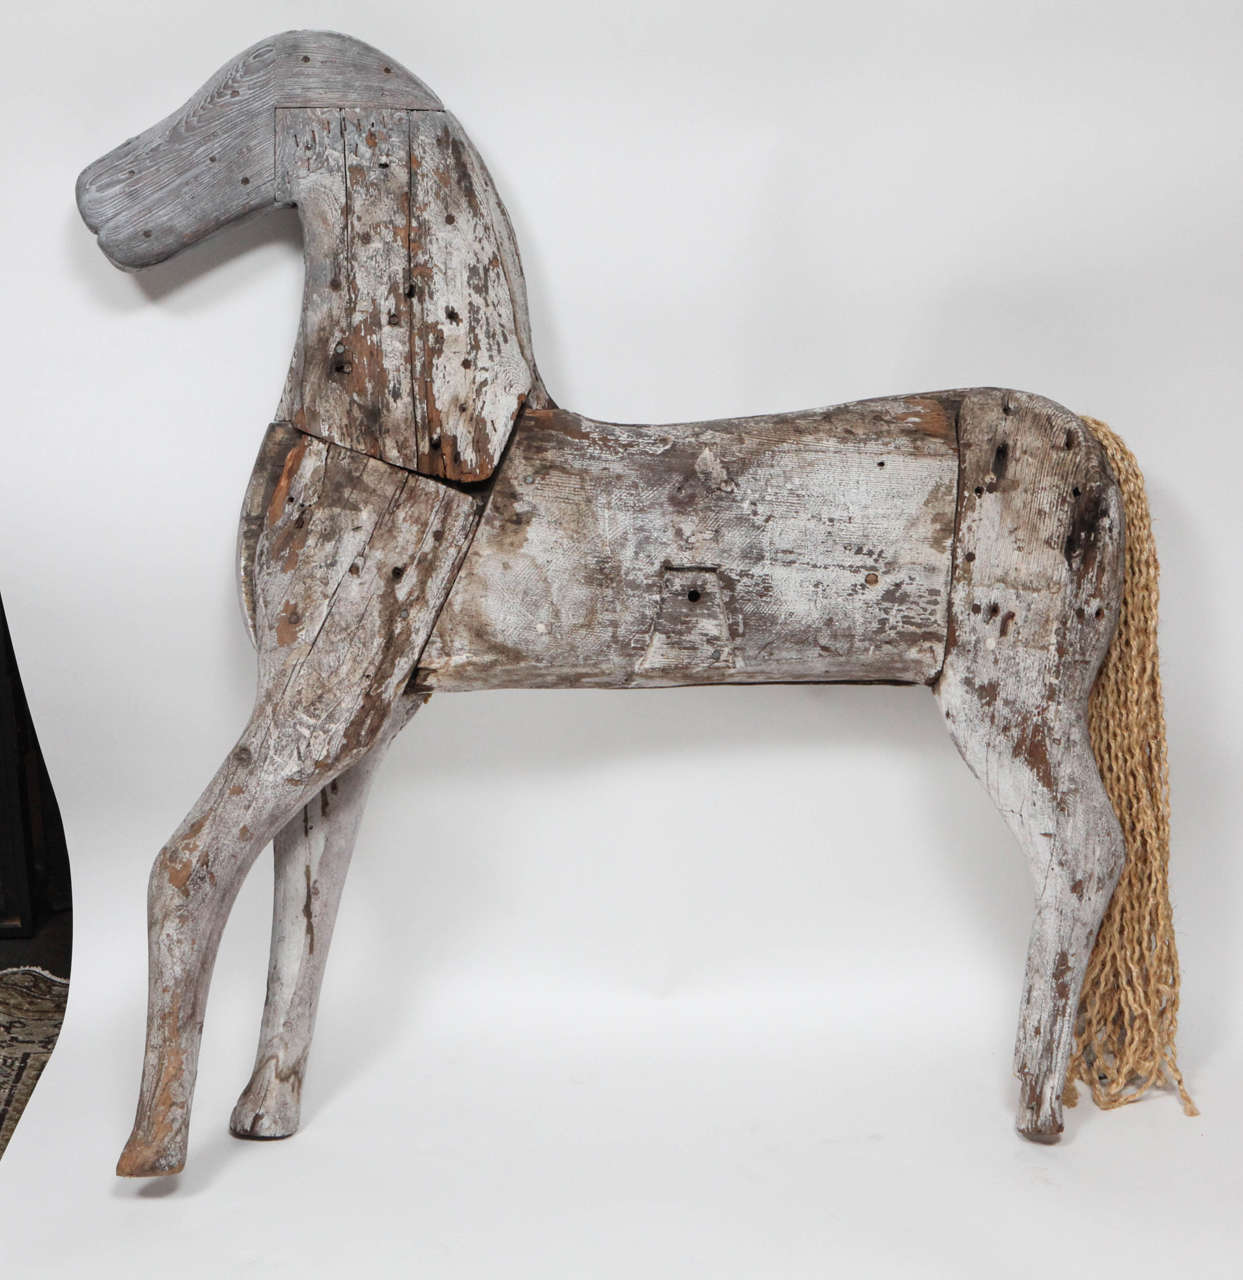 Hand-carved 19th Century wooden rocking horse with original rope tail.